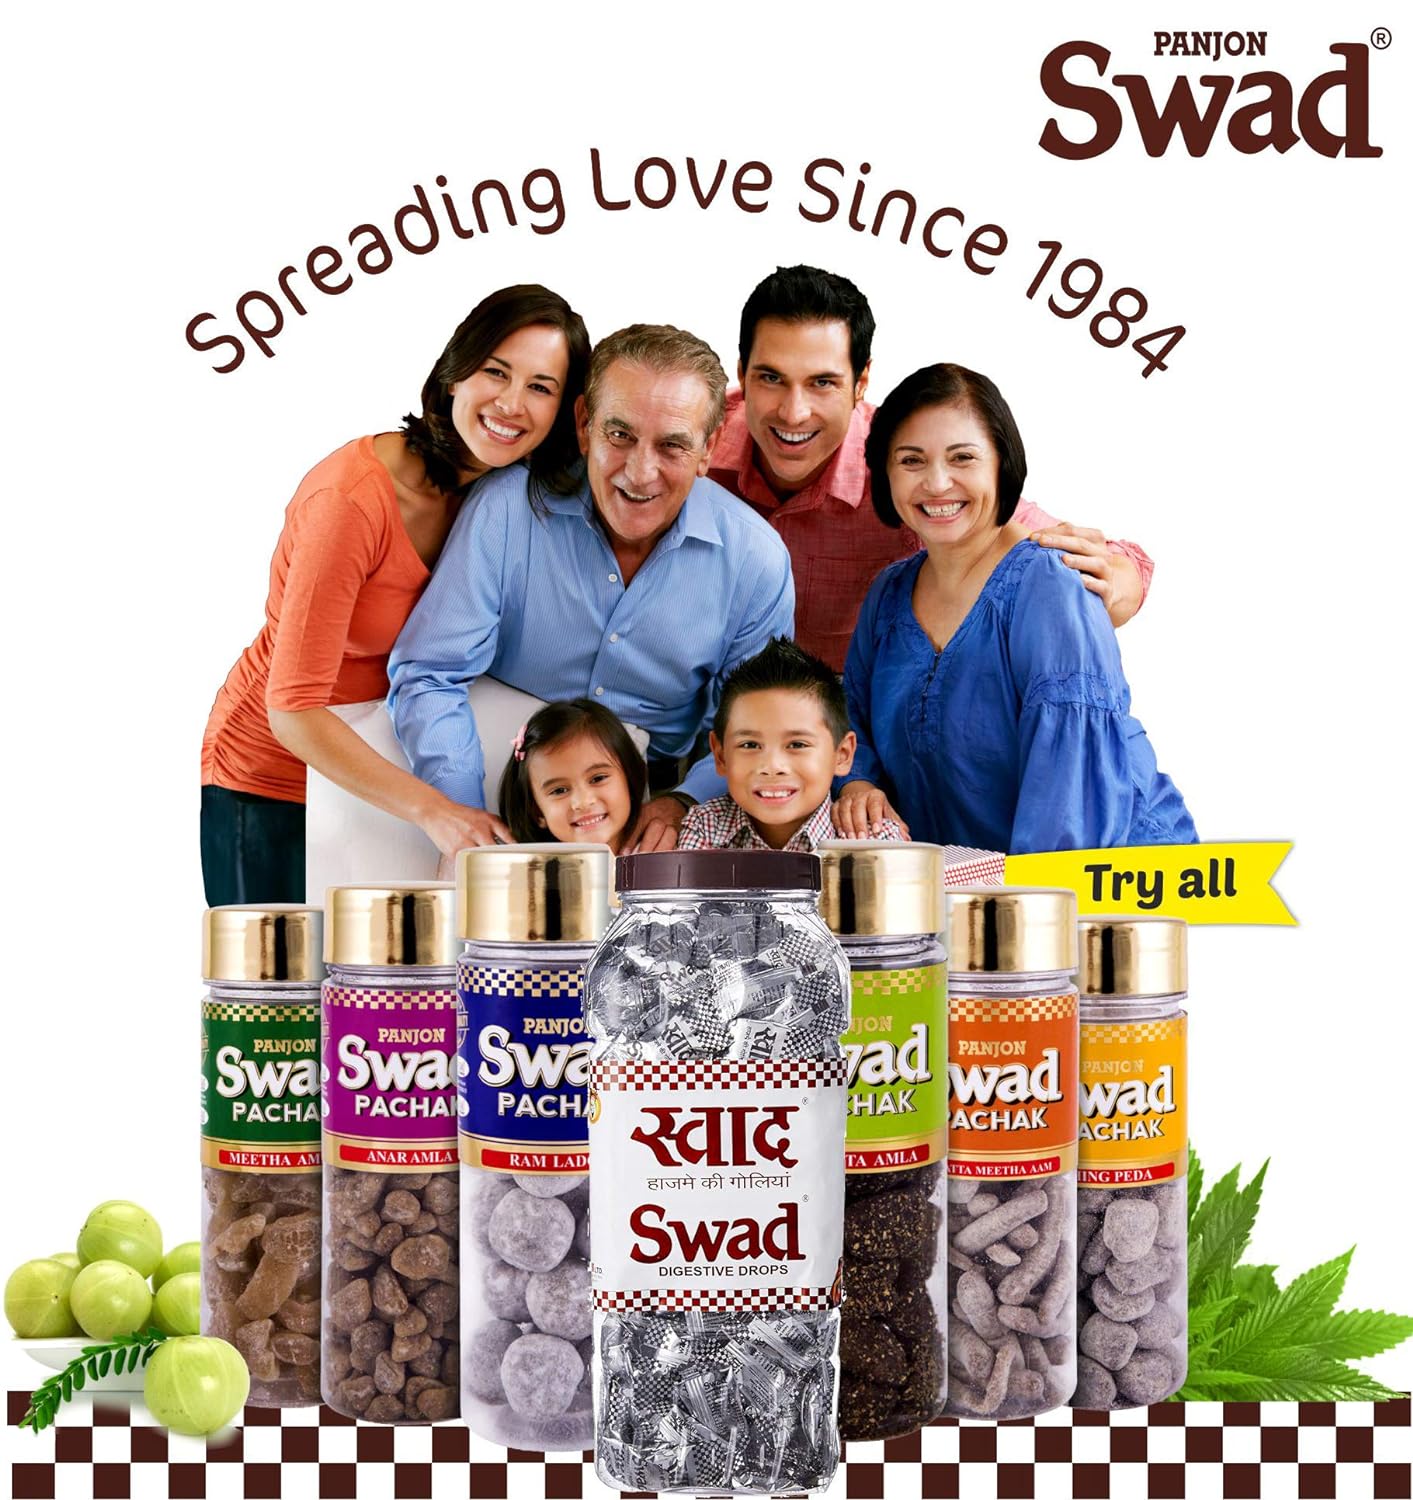 Swad Candy Gift Box (Imli & Mixed Flavour) Gifts for Birthday & Anniversary, 125 Toffee x 2 Box Pack